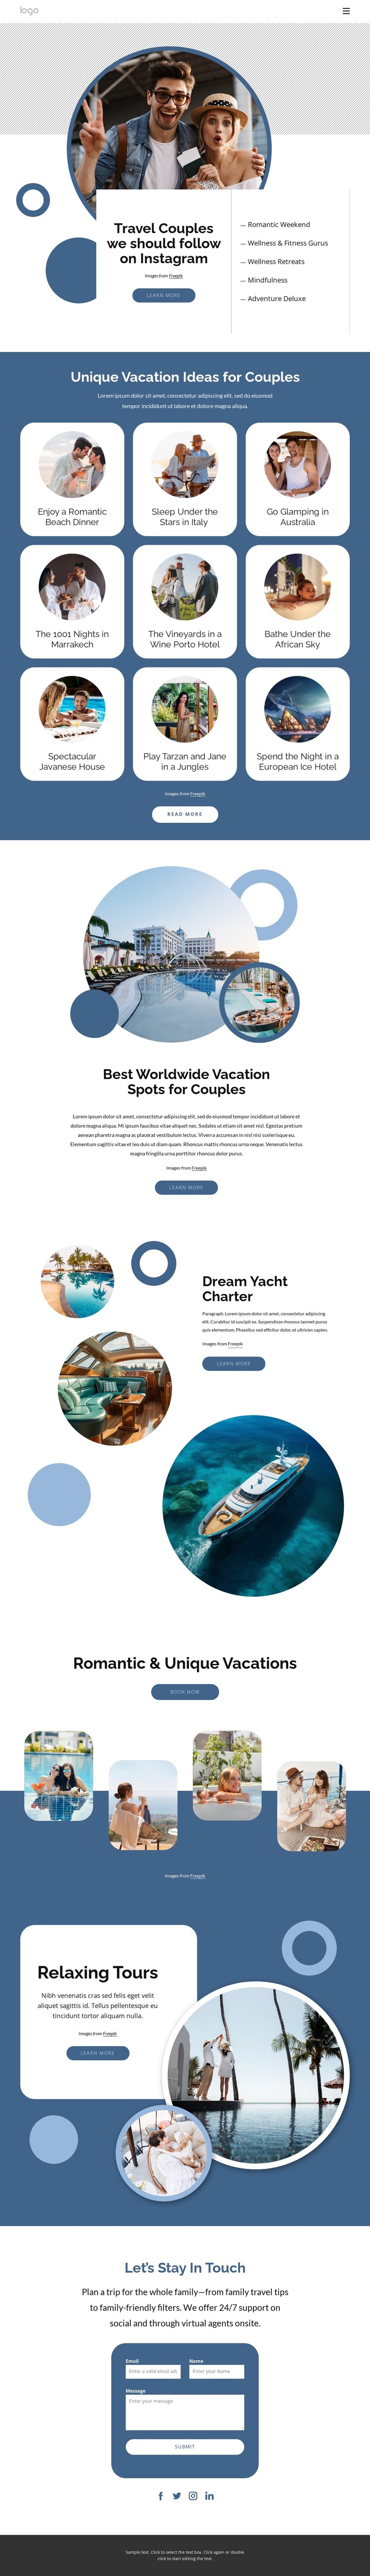 Imagine travelling to some of the most amazing places Web Design